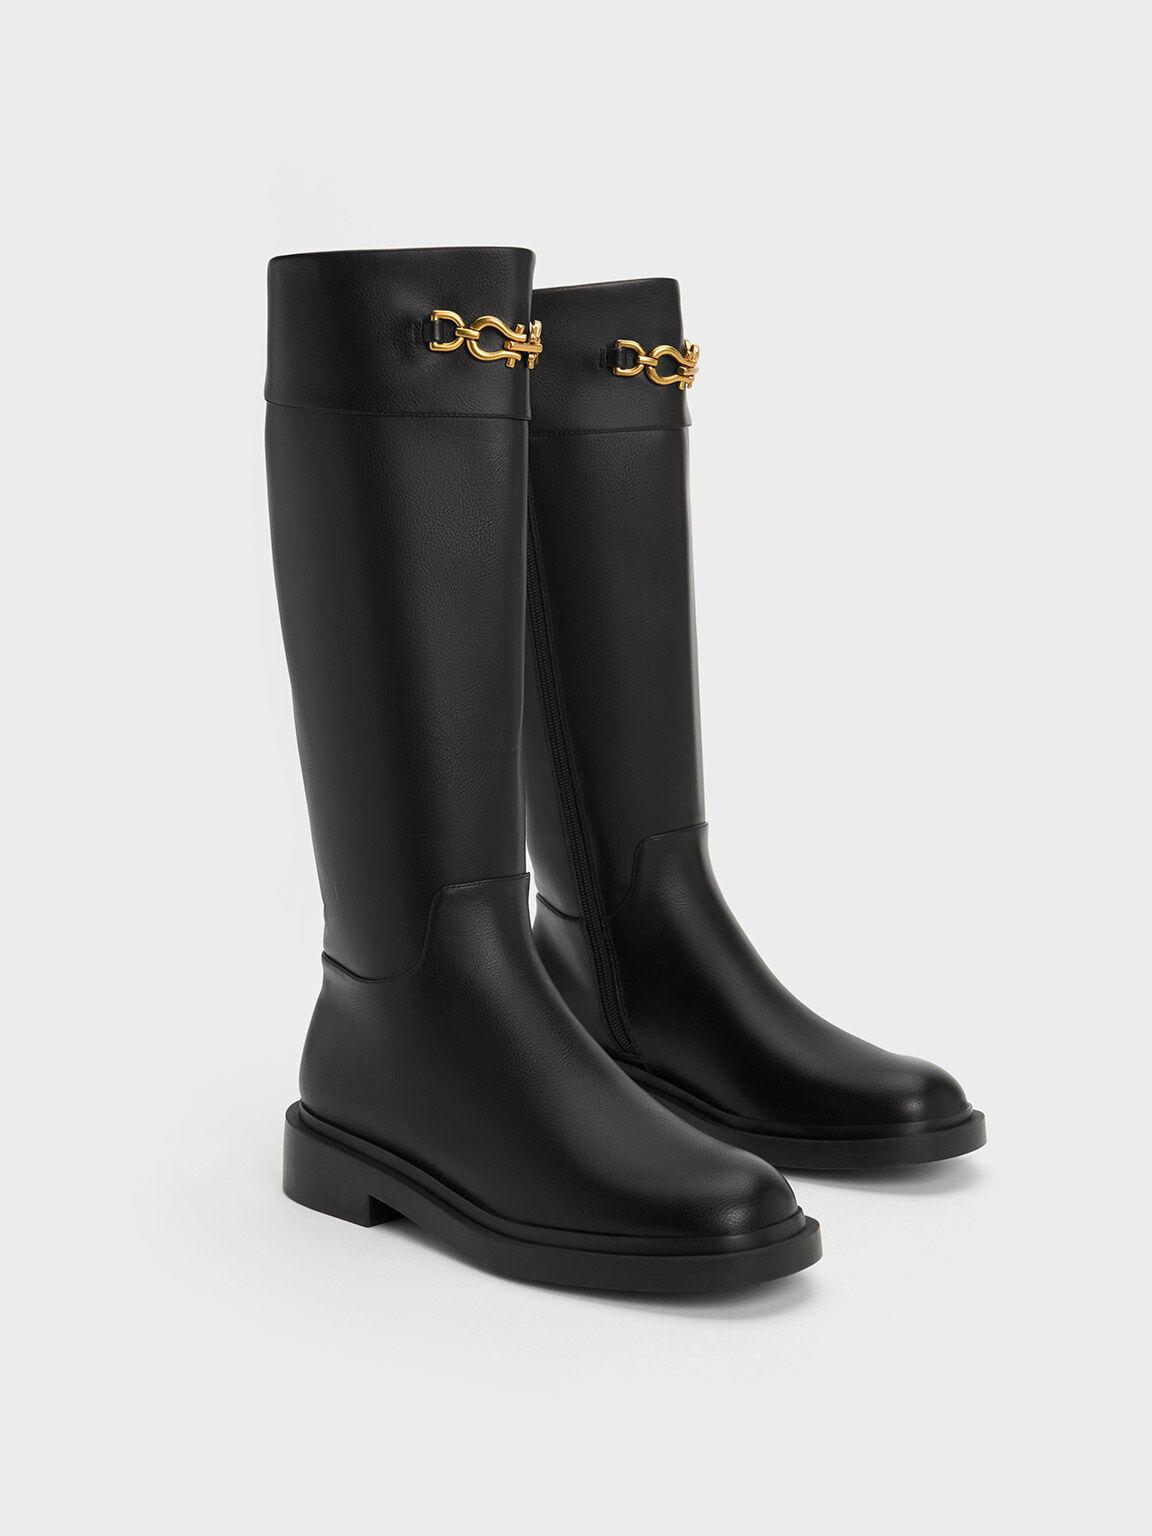 Black Metallic Chain Accent Knee-High Boots - CHARLES & KEITH LK